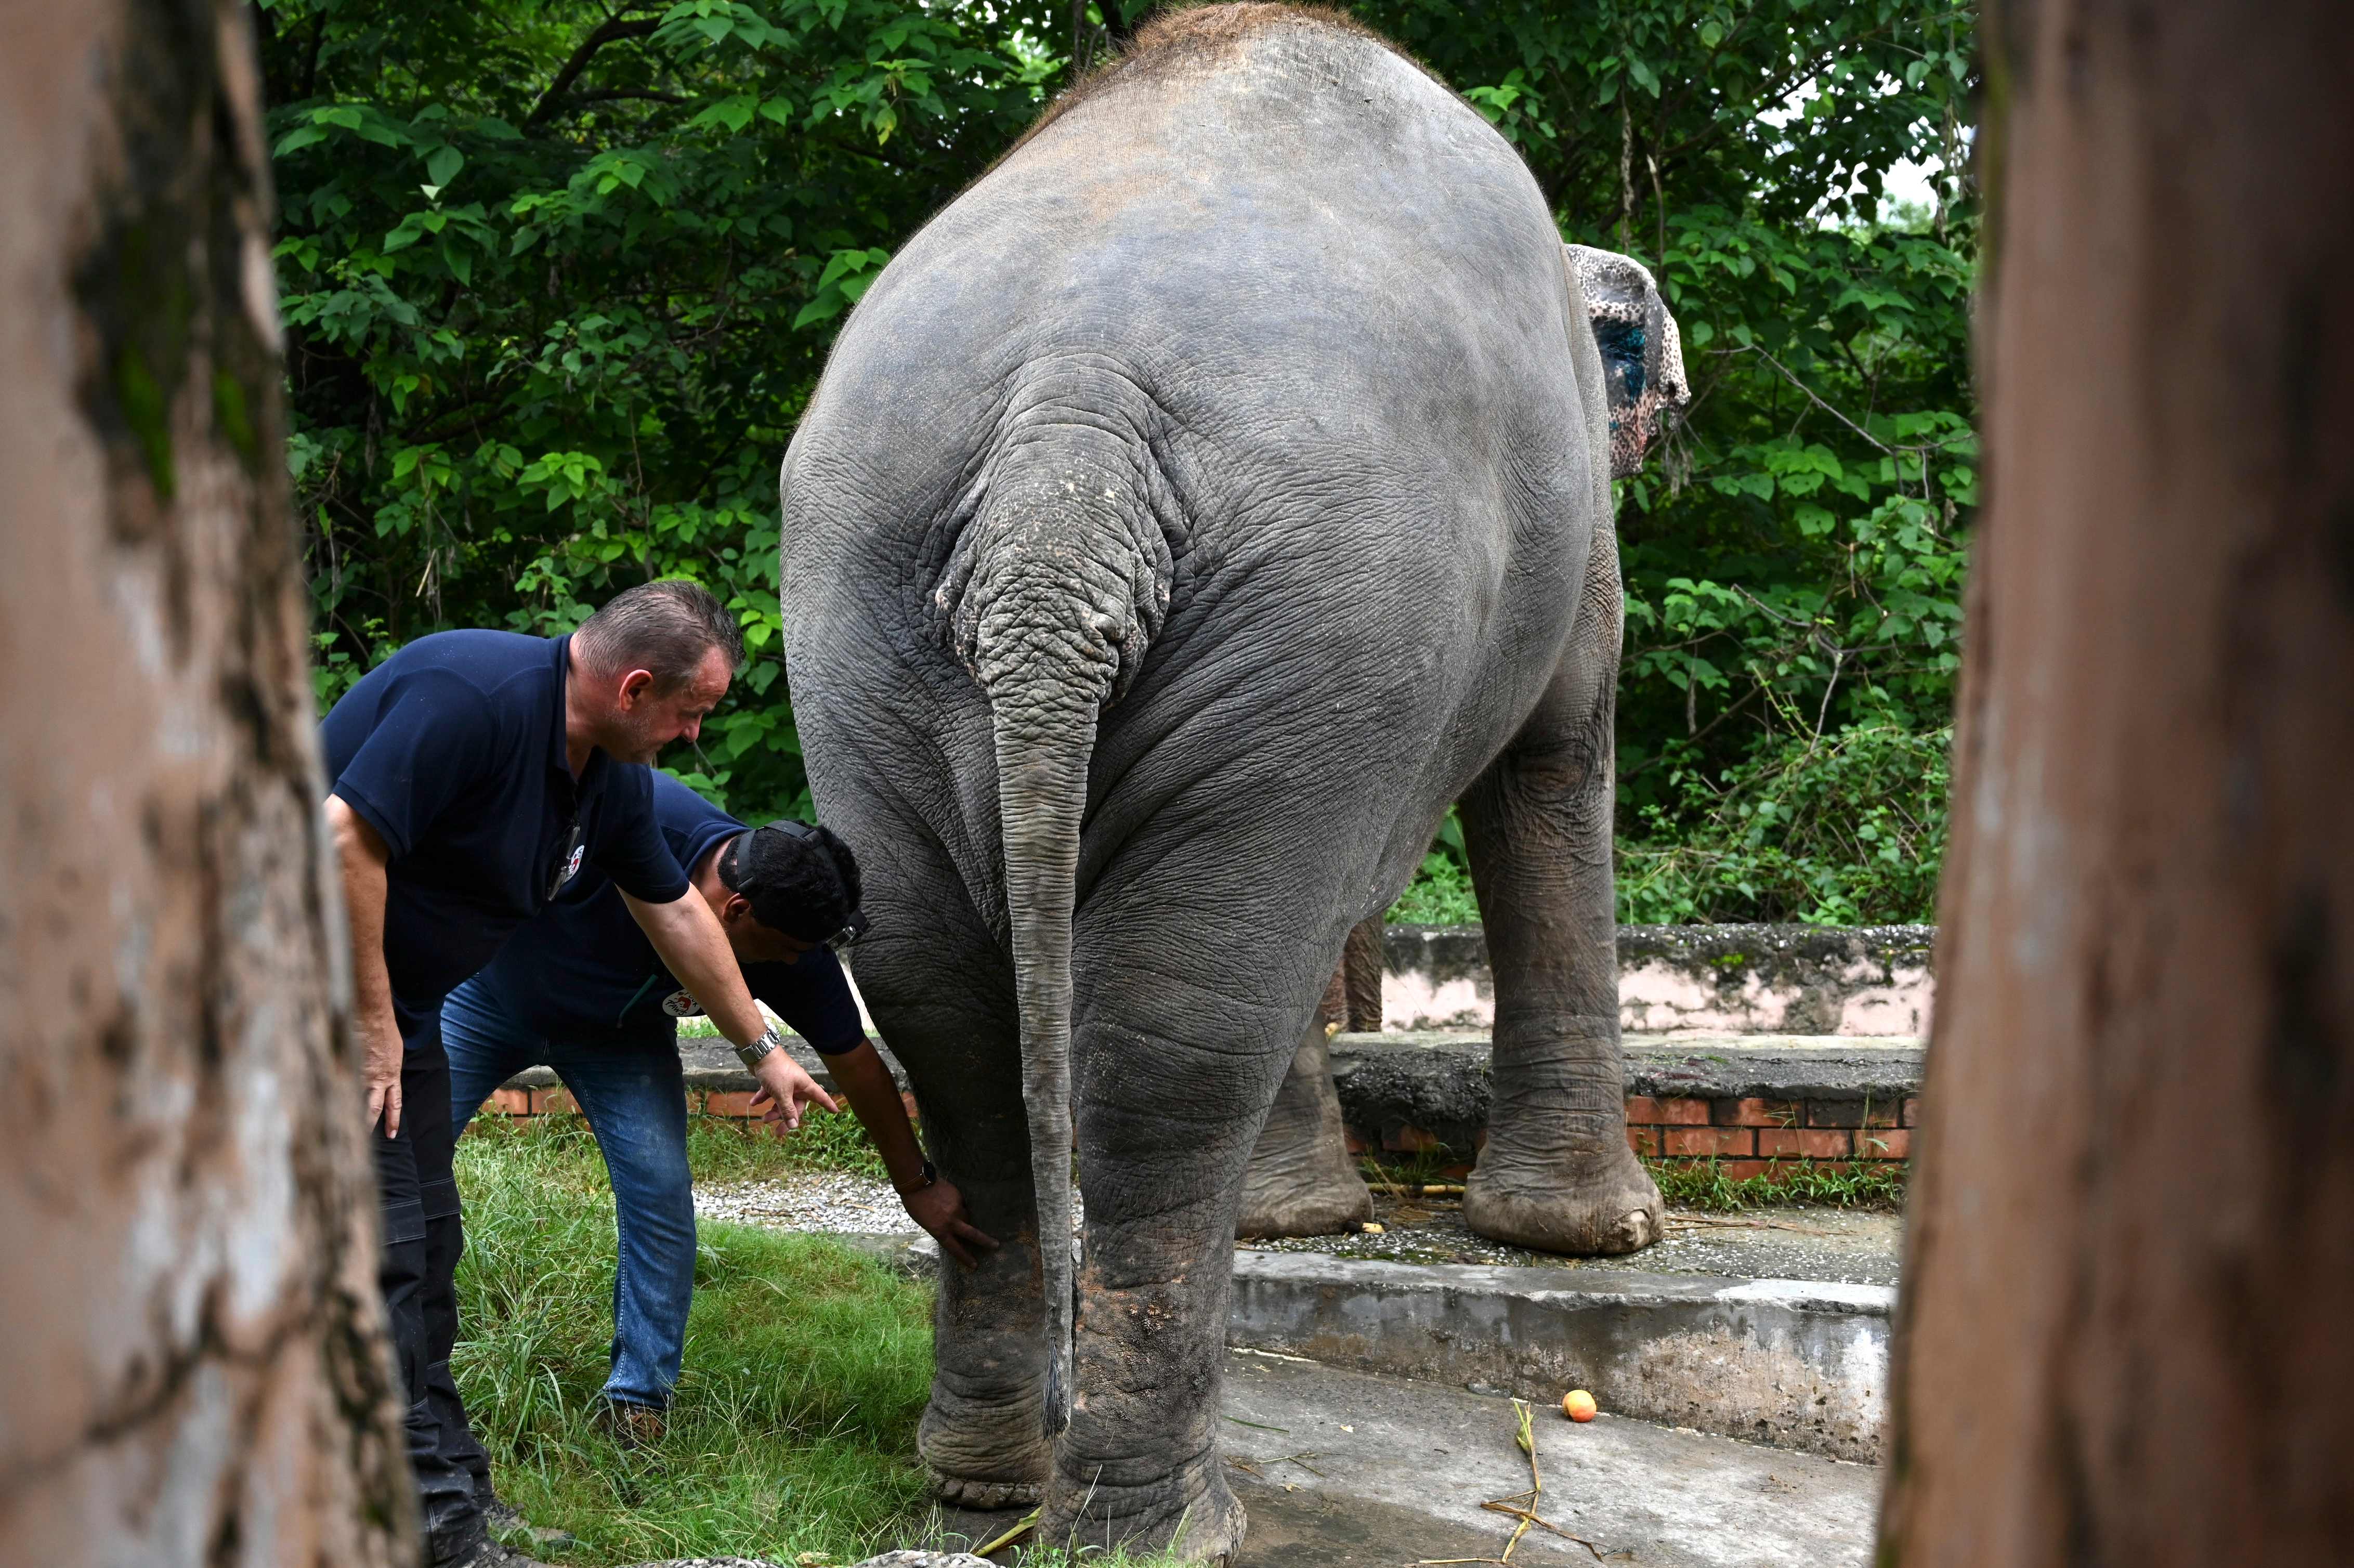 Veterinarians of Four Paws International examine Kavaan, the elephant slated to be moved to a sanctuary in Cambodia after it became the subject of a high-profile rights campaign backed by music star Cher, at the Marghazar Zoo, in Islamabad on September 4, 2020. (Photo by Aamir QURESHI / AFP)